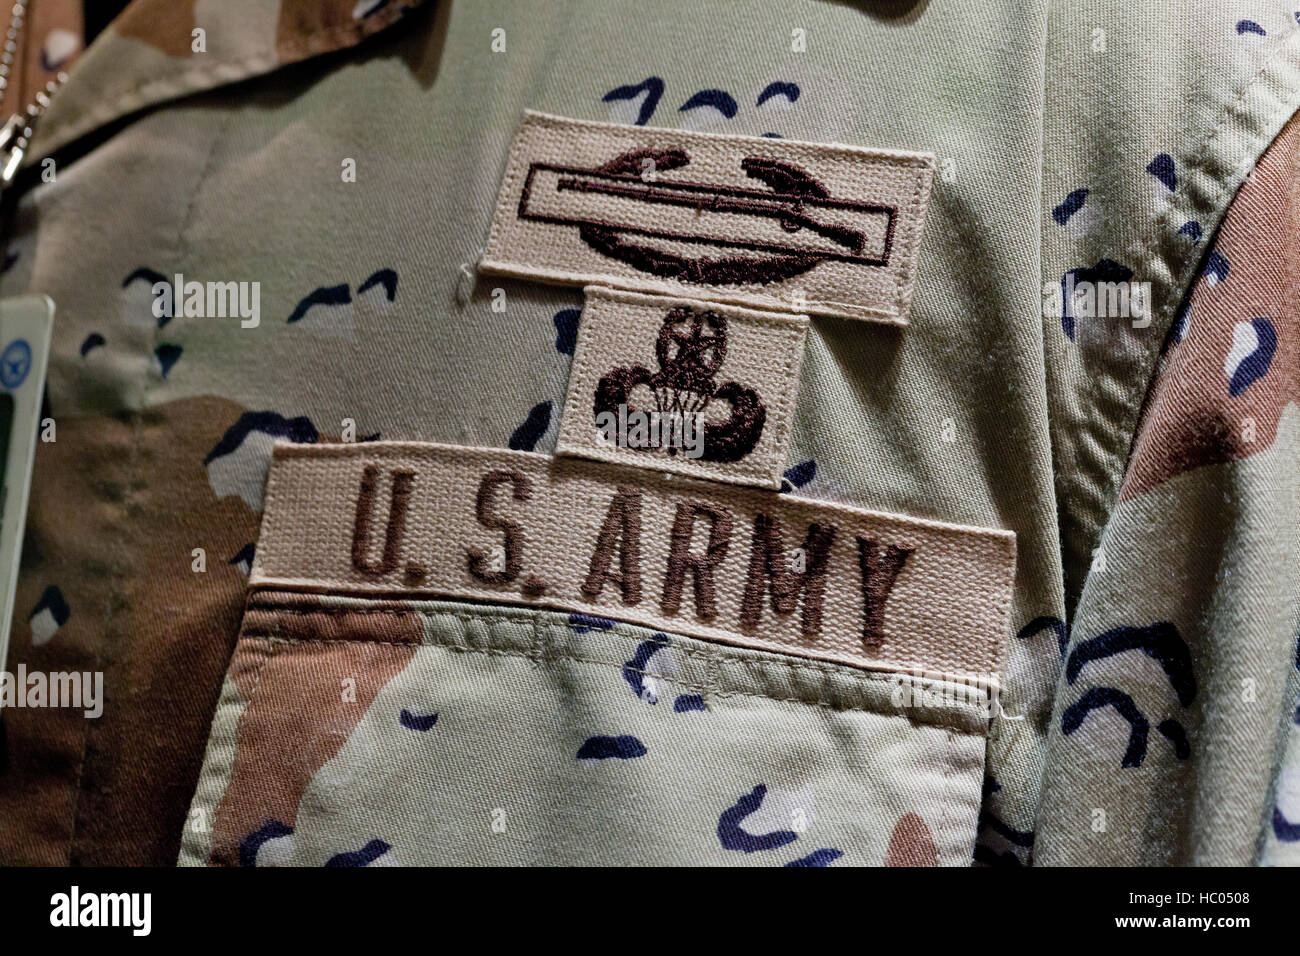 US Army General Norman Schwarzkopf name tag on fatigues - USA Stock Photo